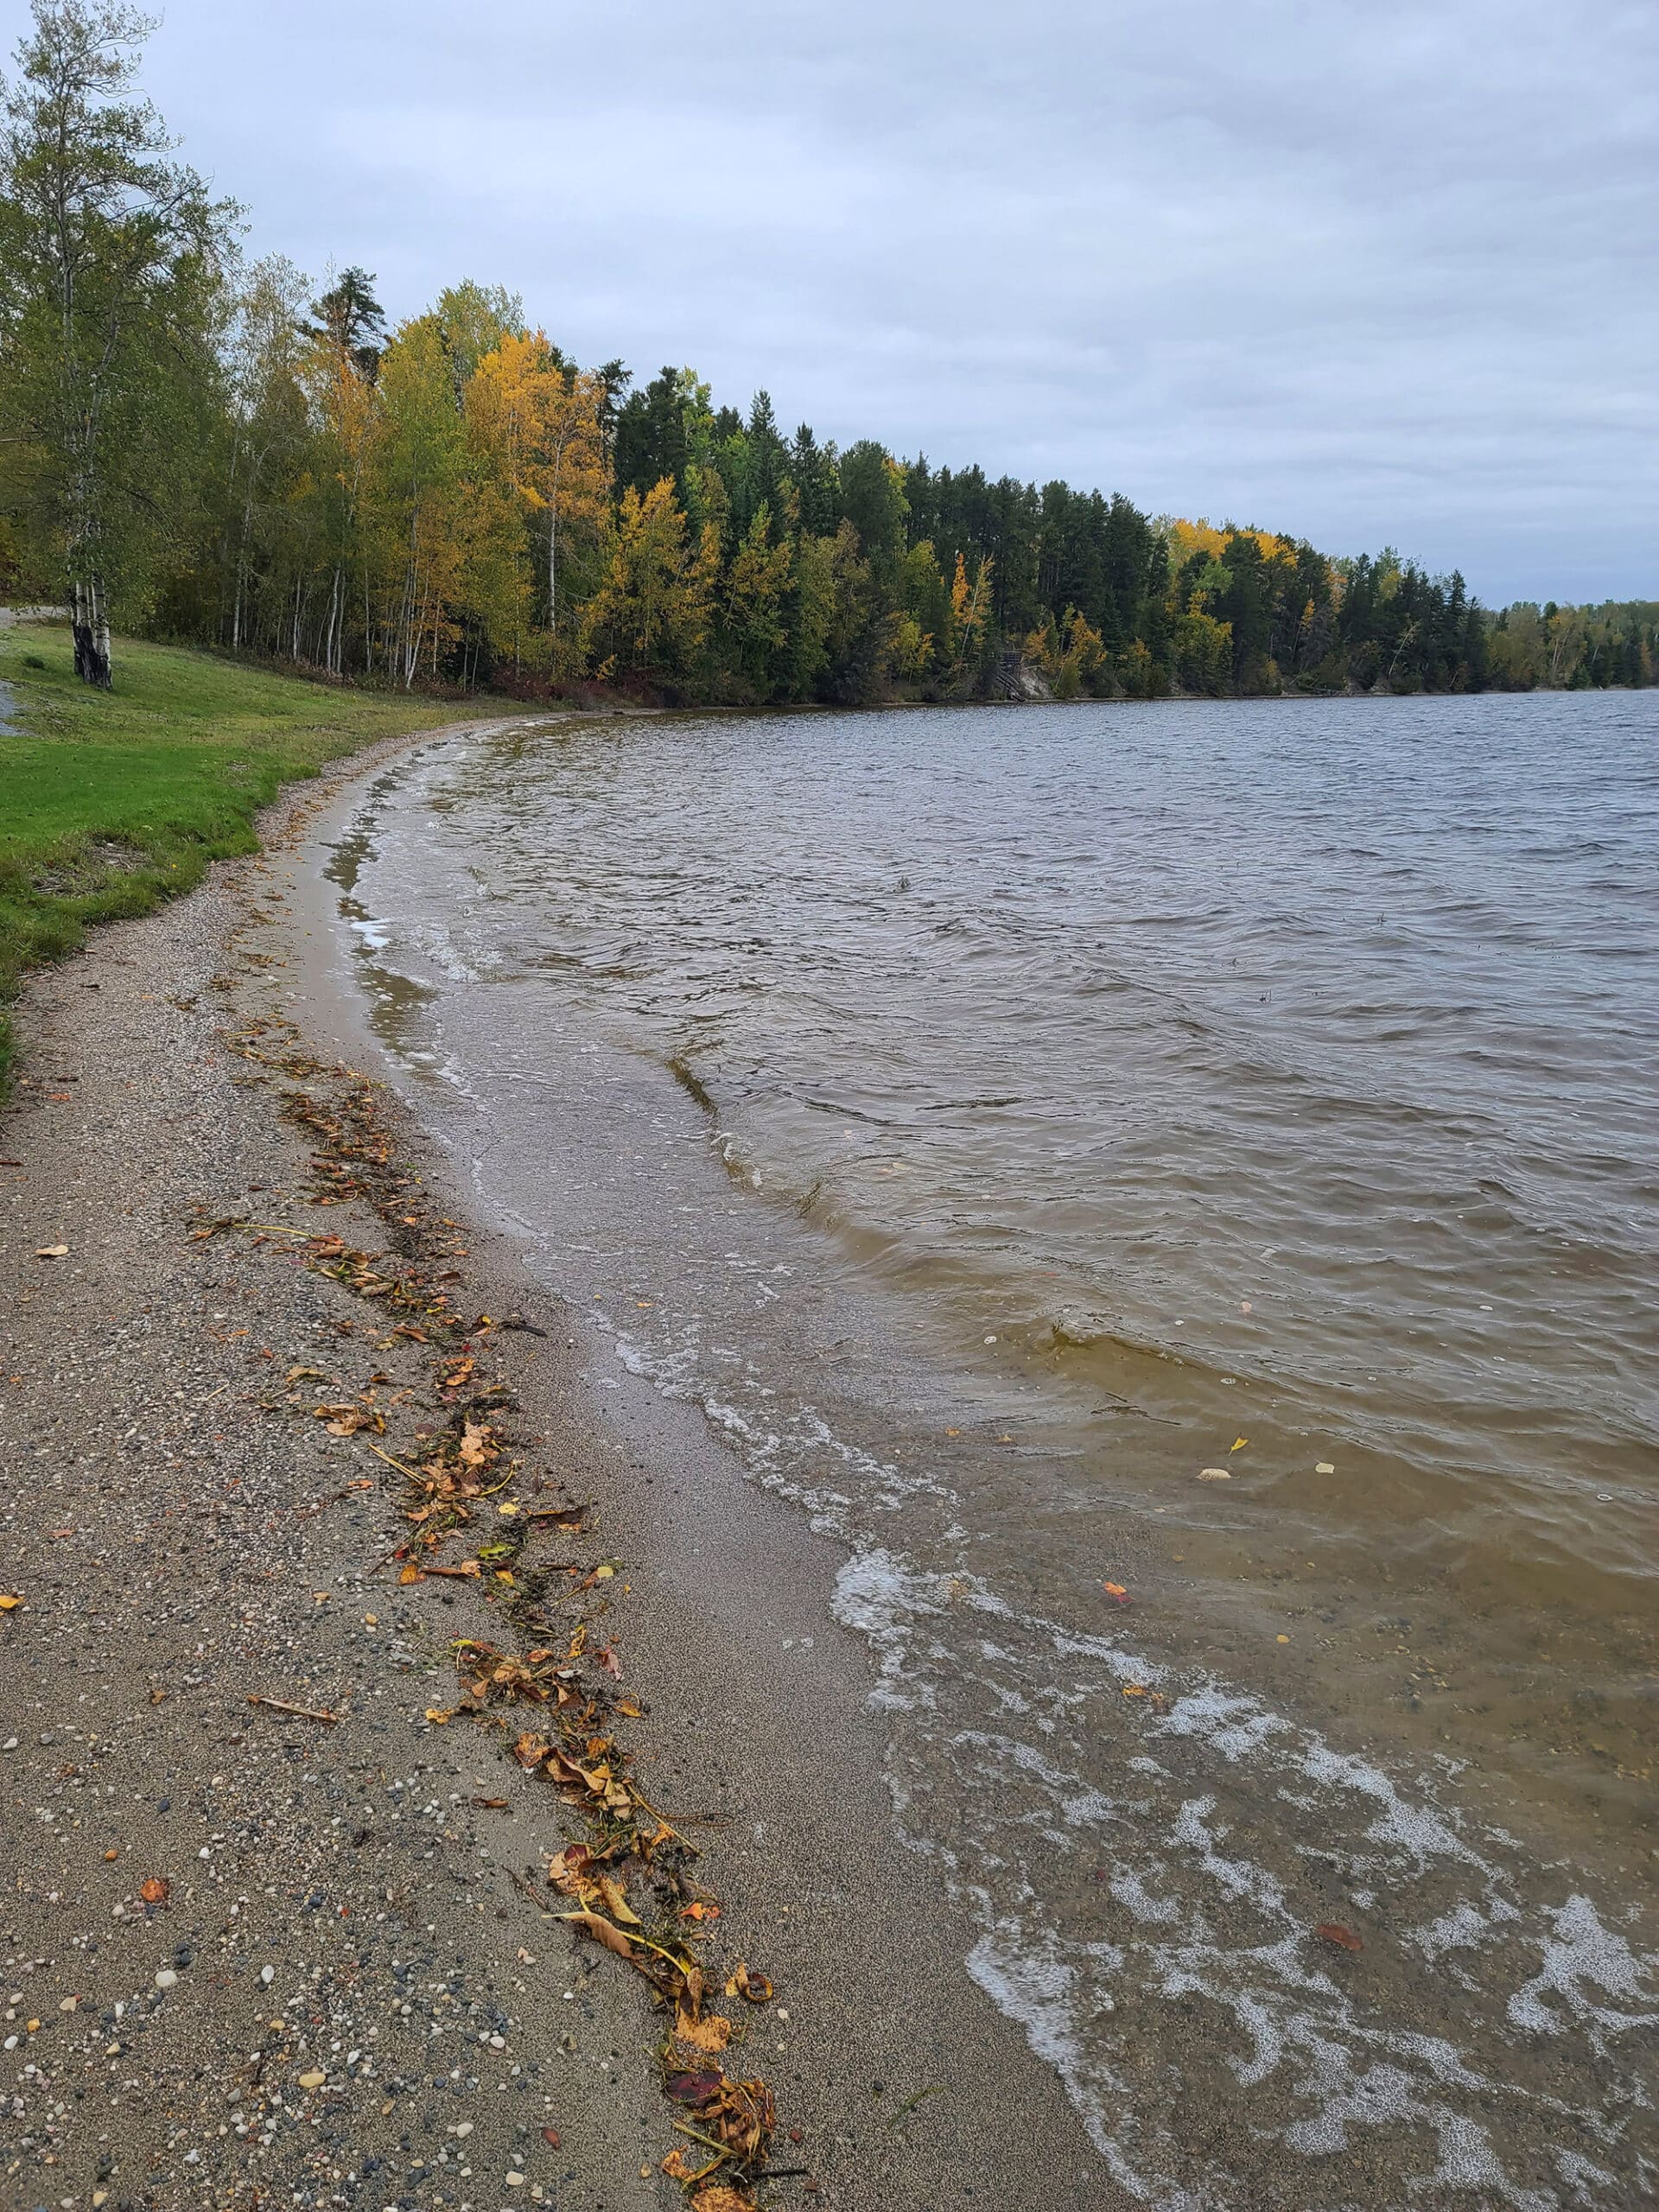 The beach at macLeod Provincial park.